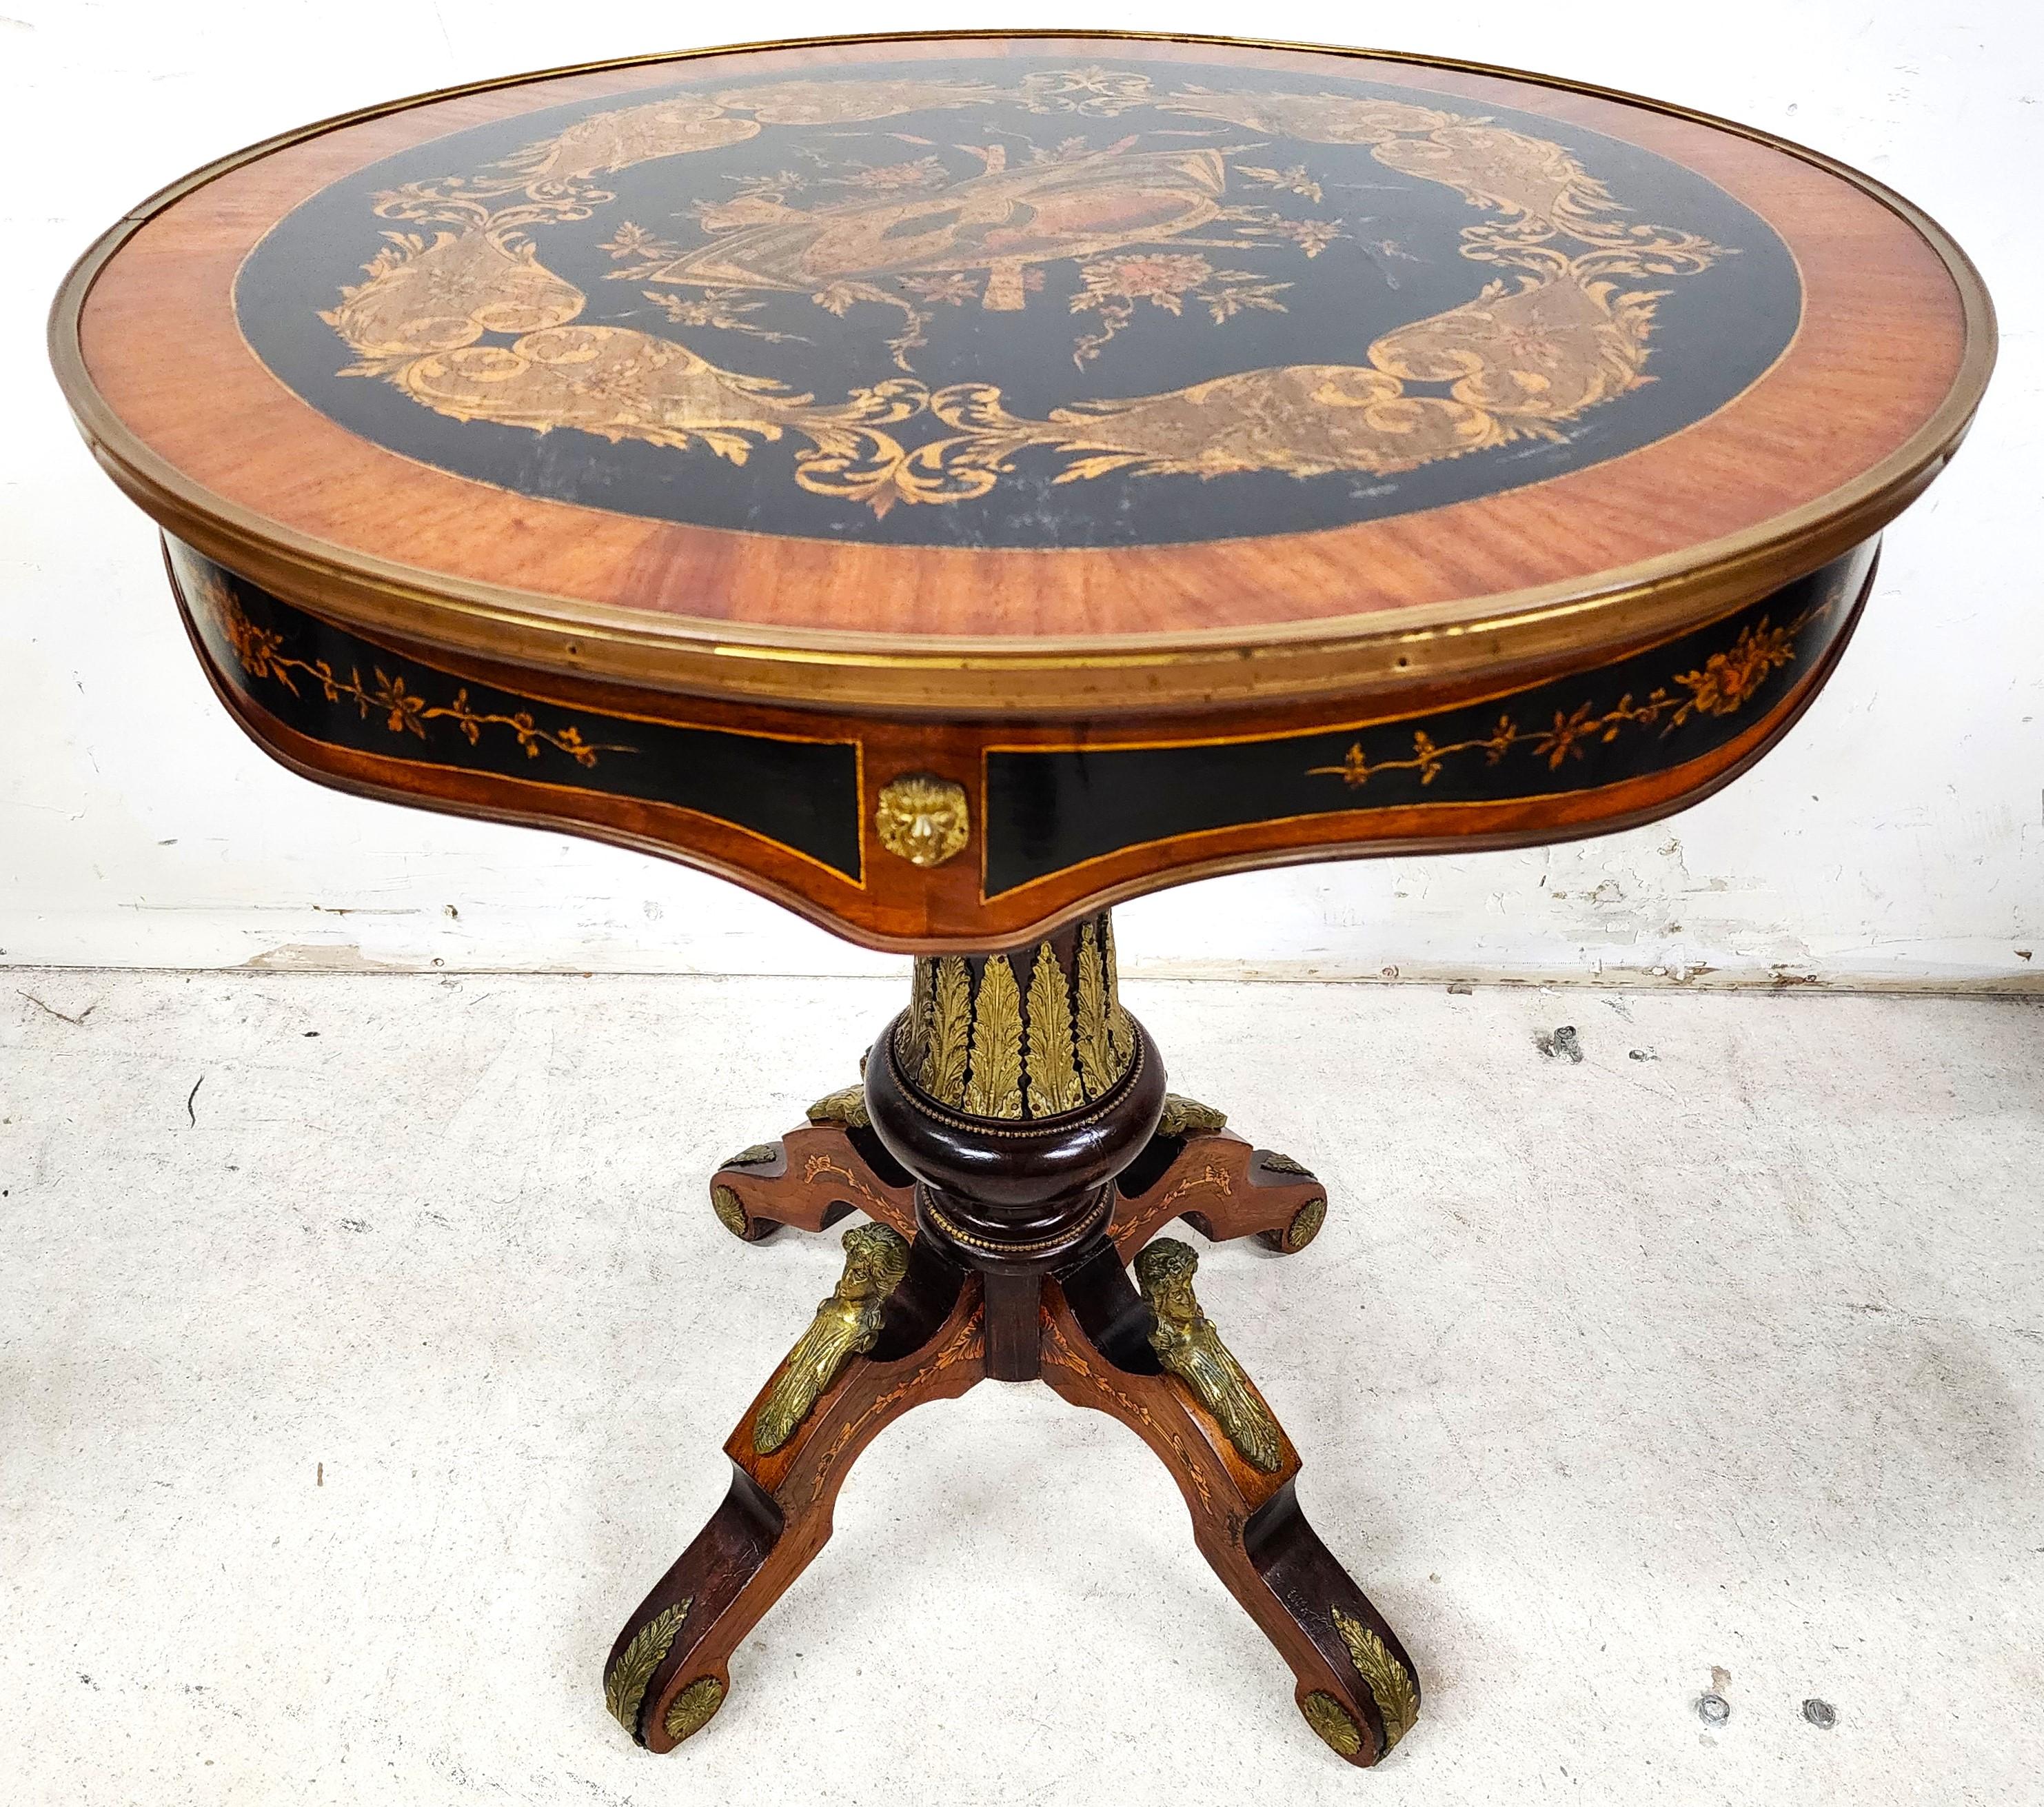 For FULL item description click on CONTINUE READING at the bottom of this page.

Offering One Of Our Recent Palm Beach Estate Fine Furniture Acquisitions Of A
French Louis XV Style Center Accent Lamp Vintage Table With Gilt Ormolu Mounts & Trim